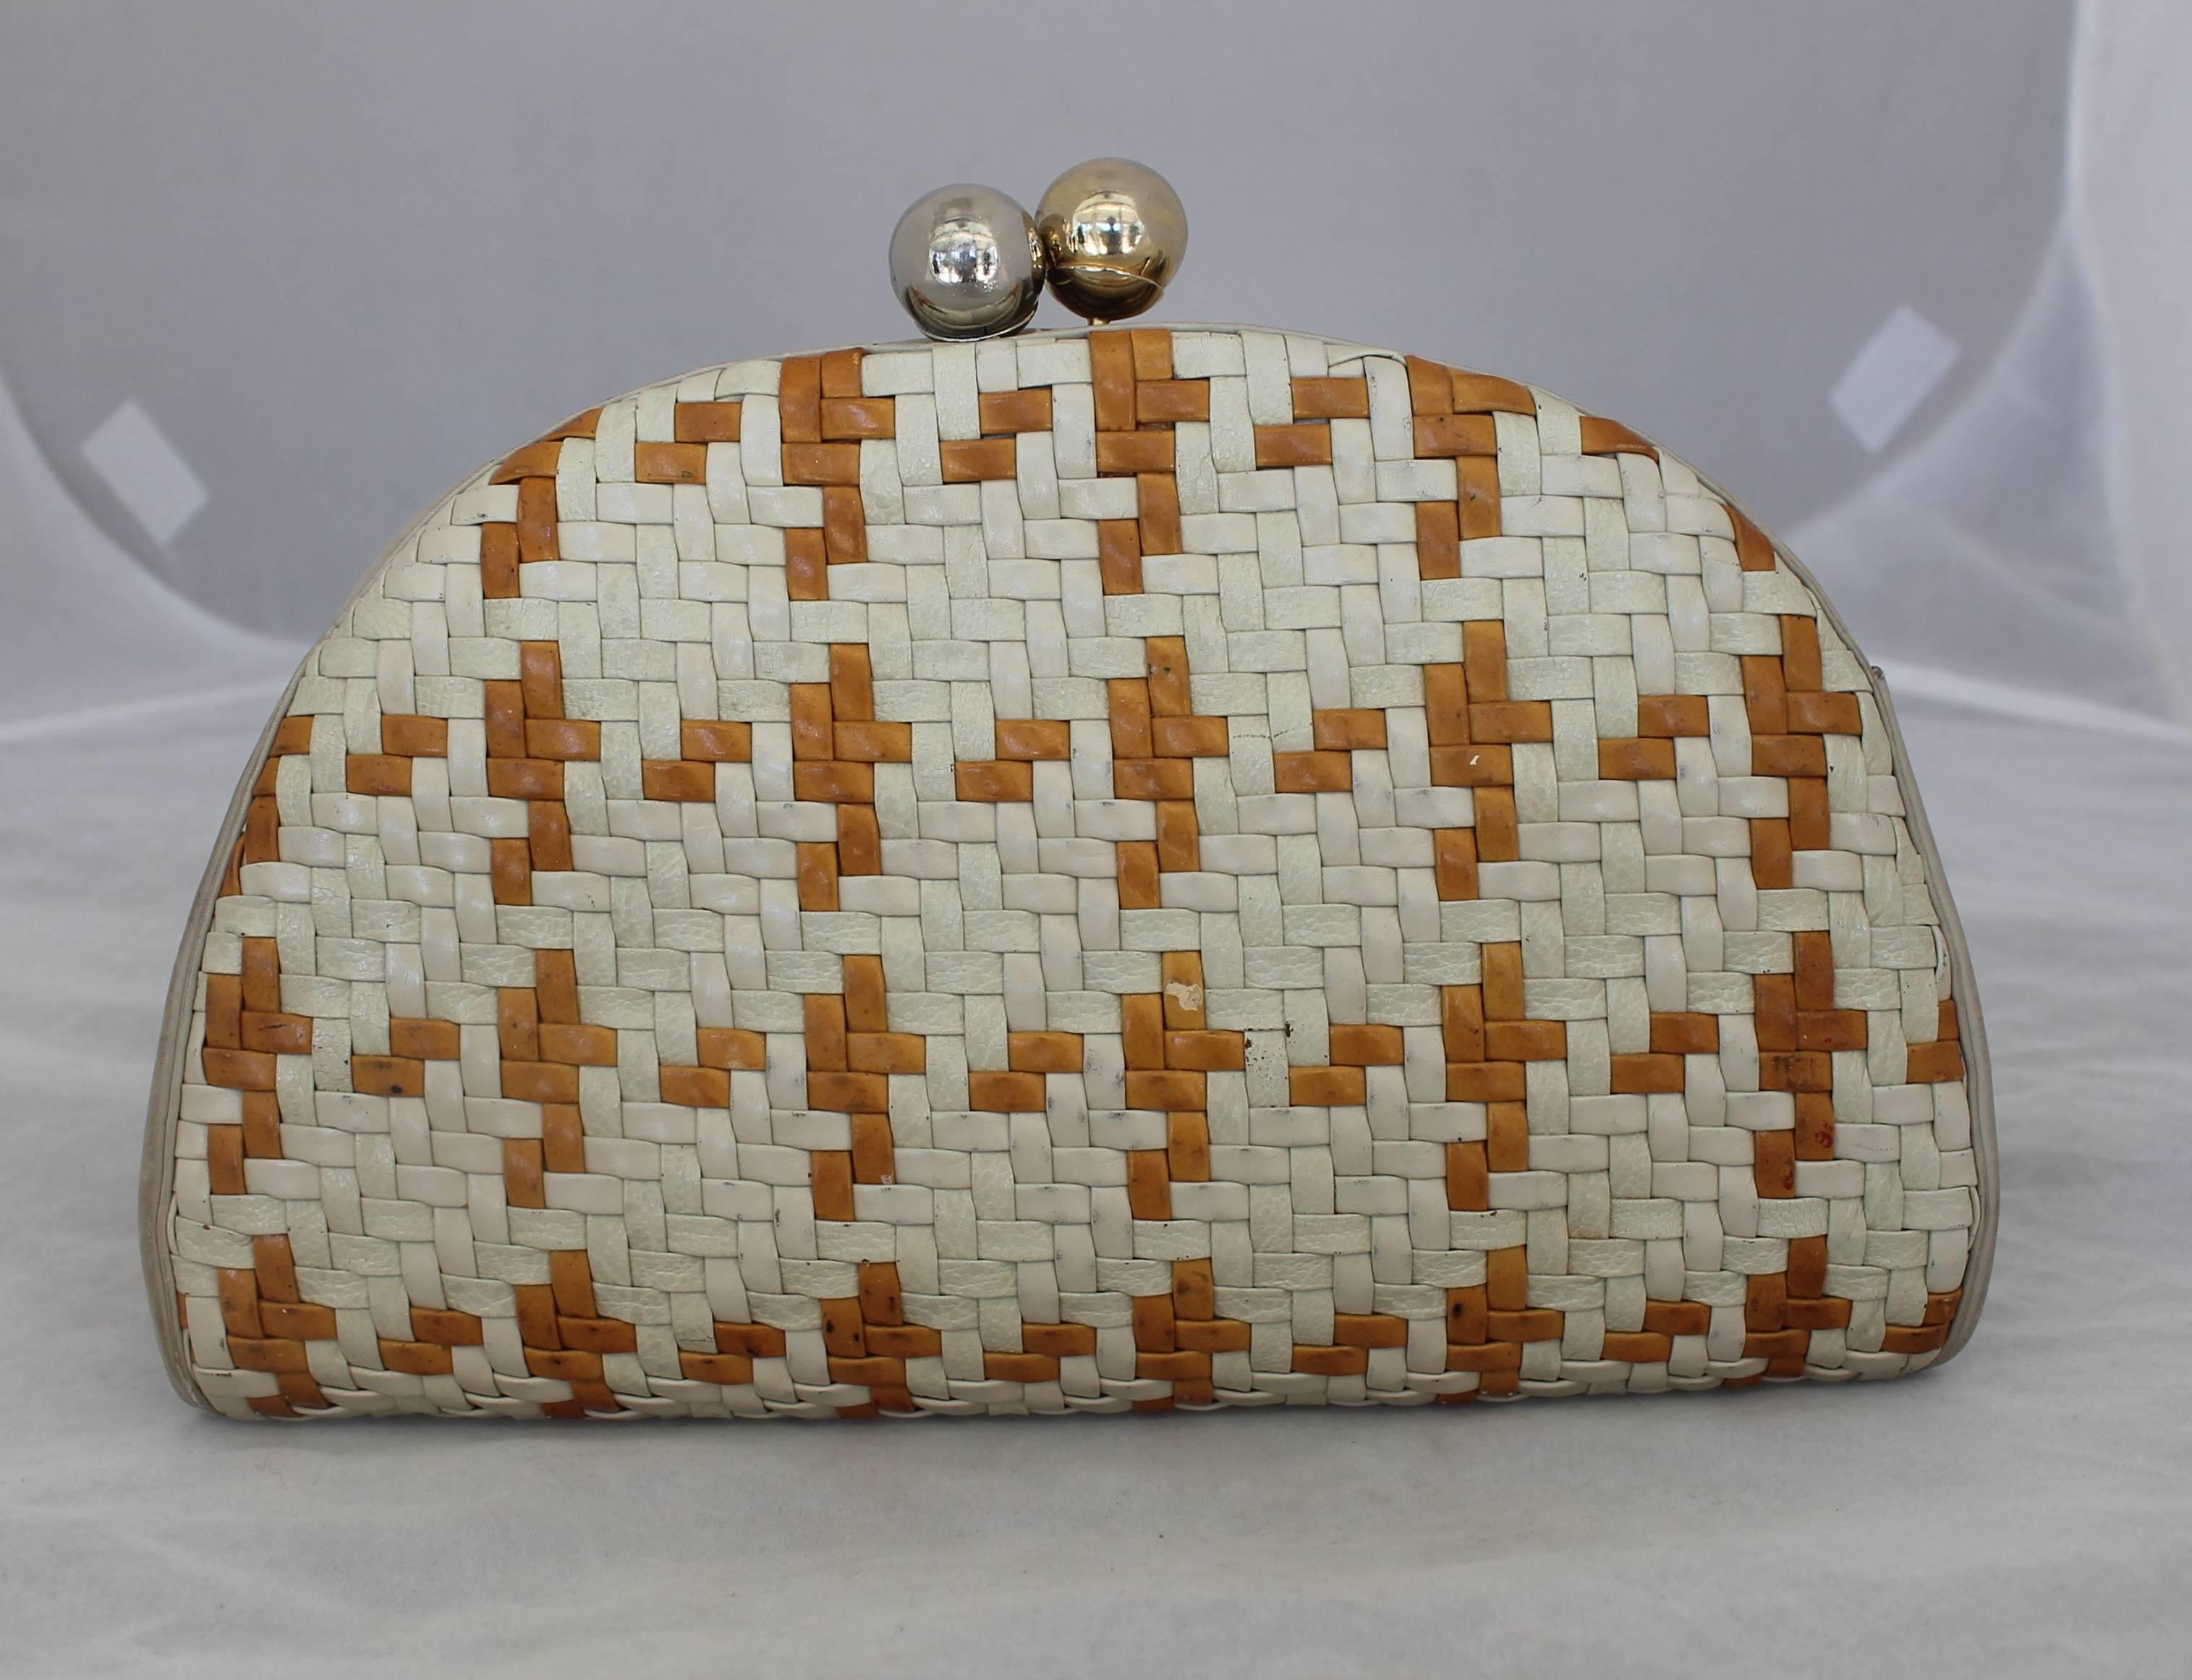 Judith Leiber Ivory & Mustard Woven Bag with Mixed Hardware - circa 1990's. This bag is in fair vintage condition with visible wear. The woven areas have scuffs along both sides and there is also discoloration on the inside lining. However, this is